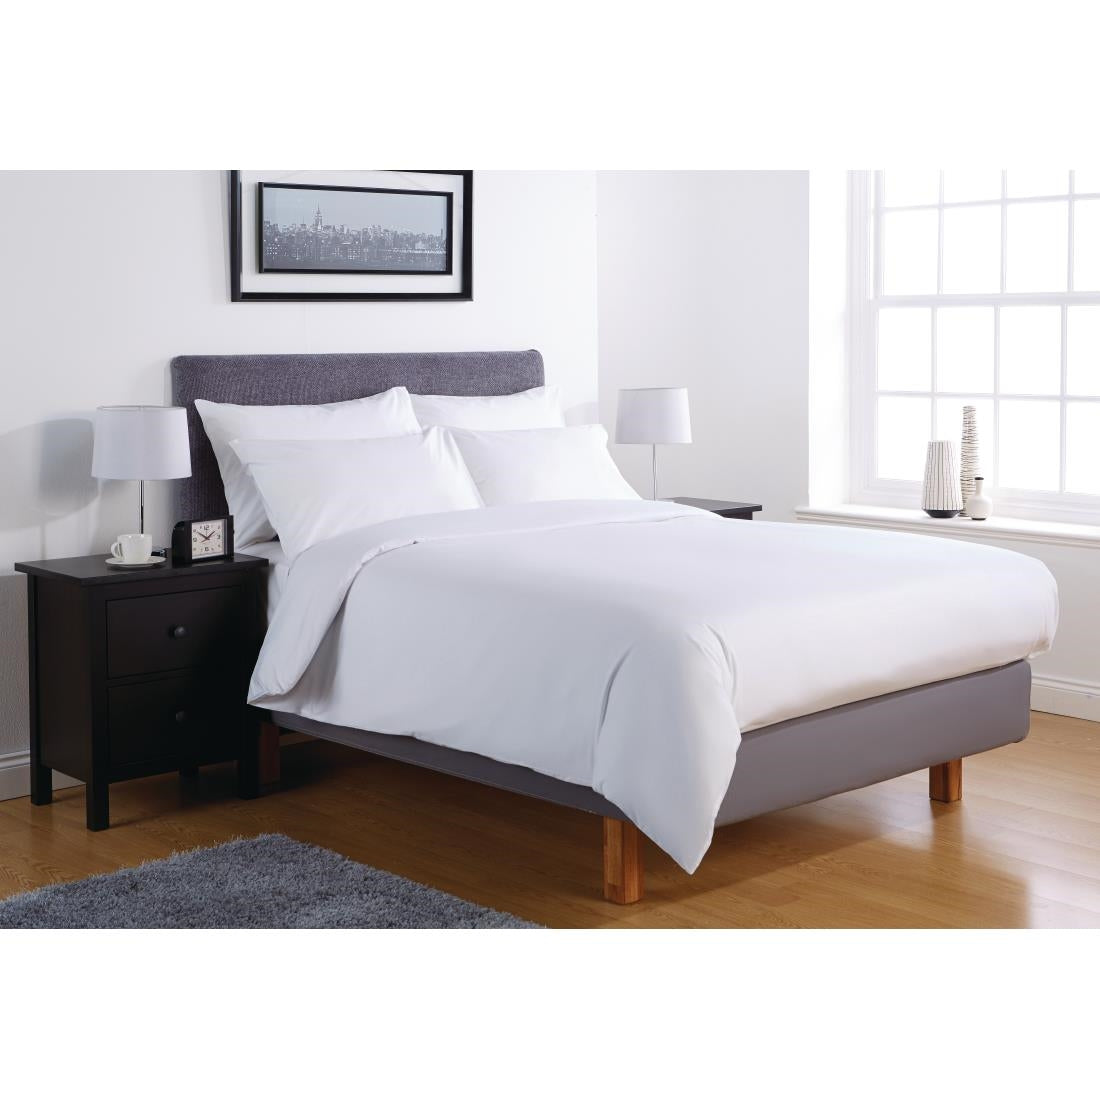 GT802 Mitre Comfort Percale Fitted Sheet White Super King